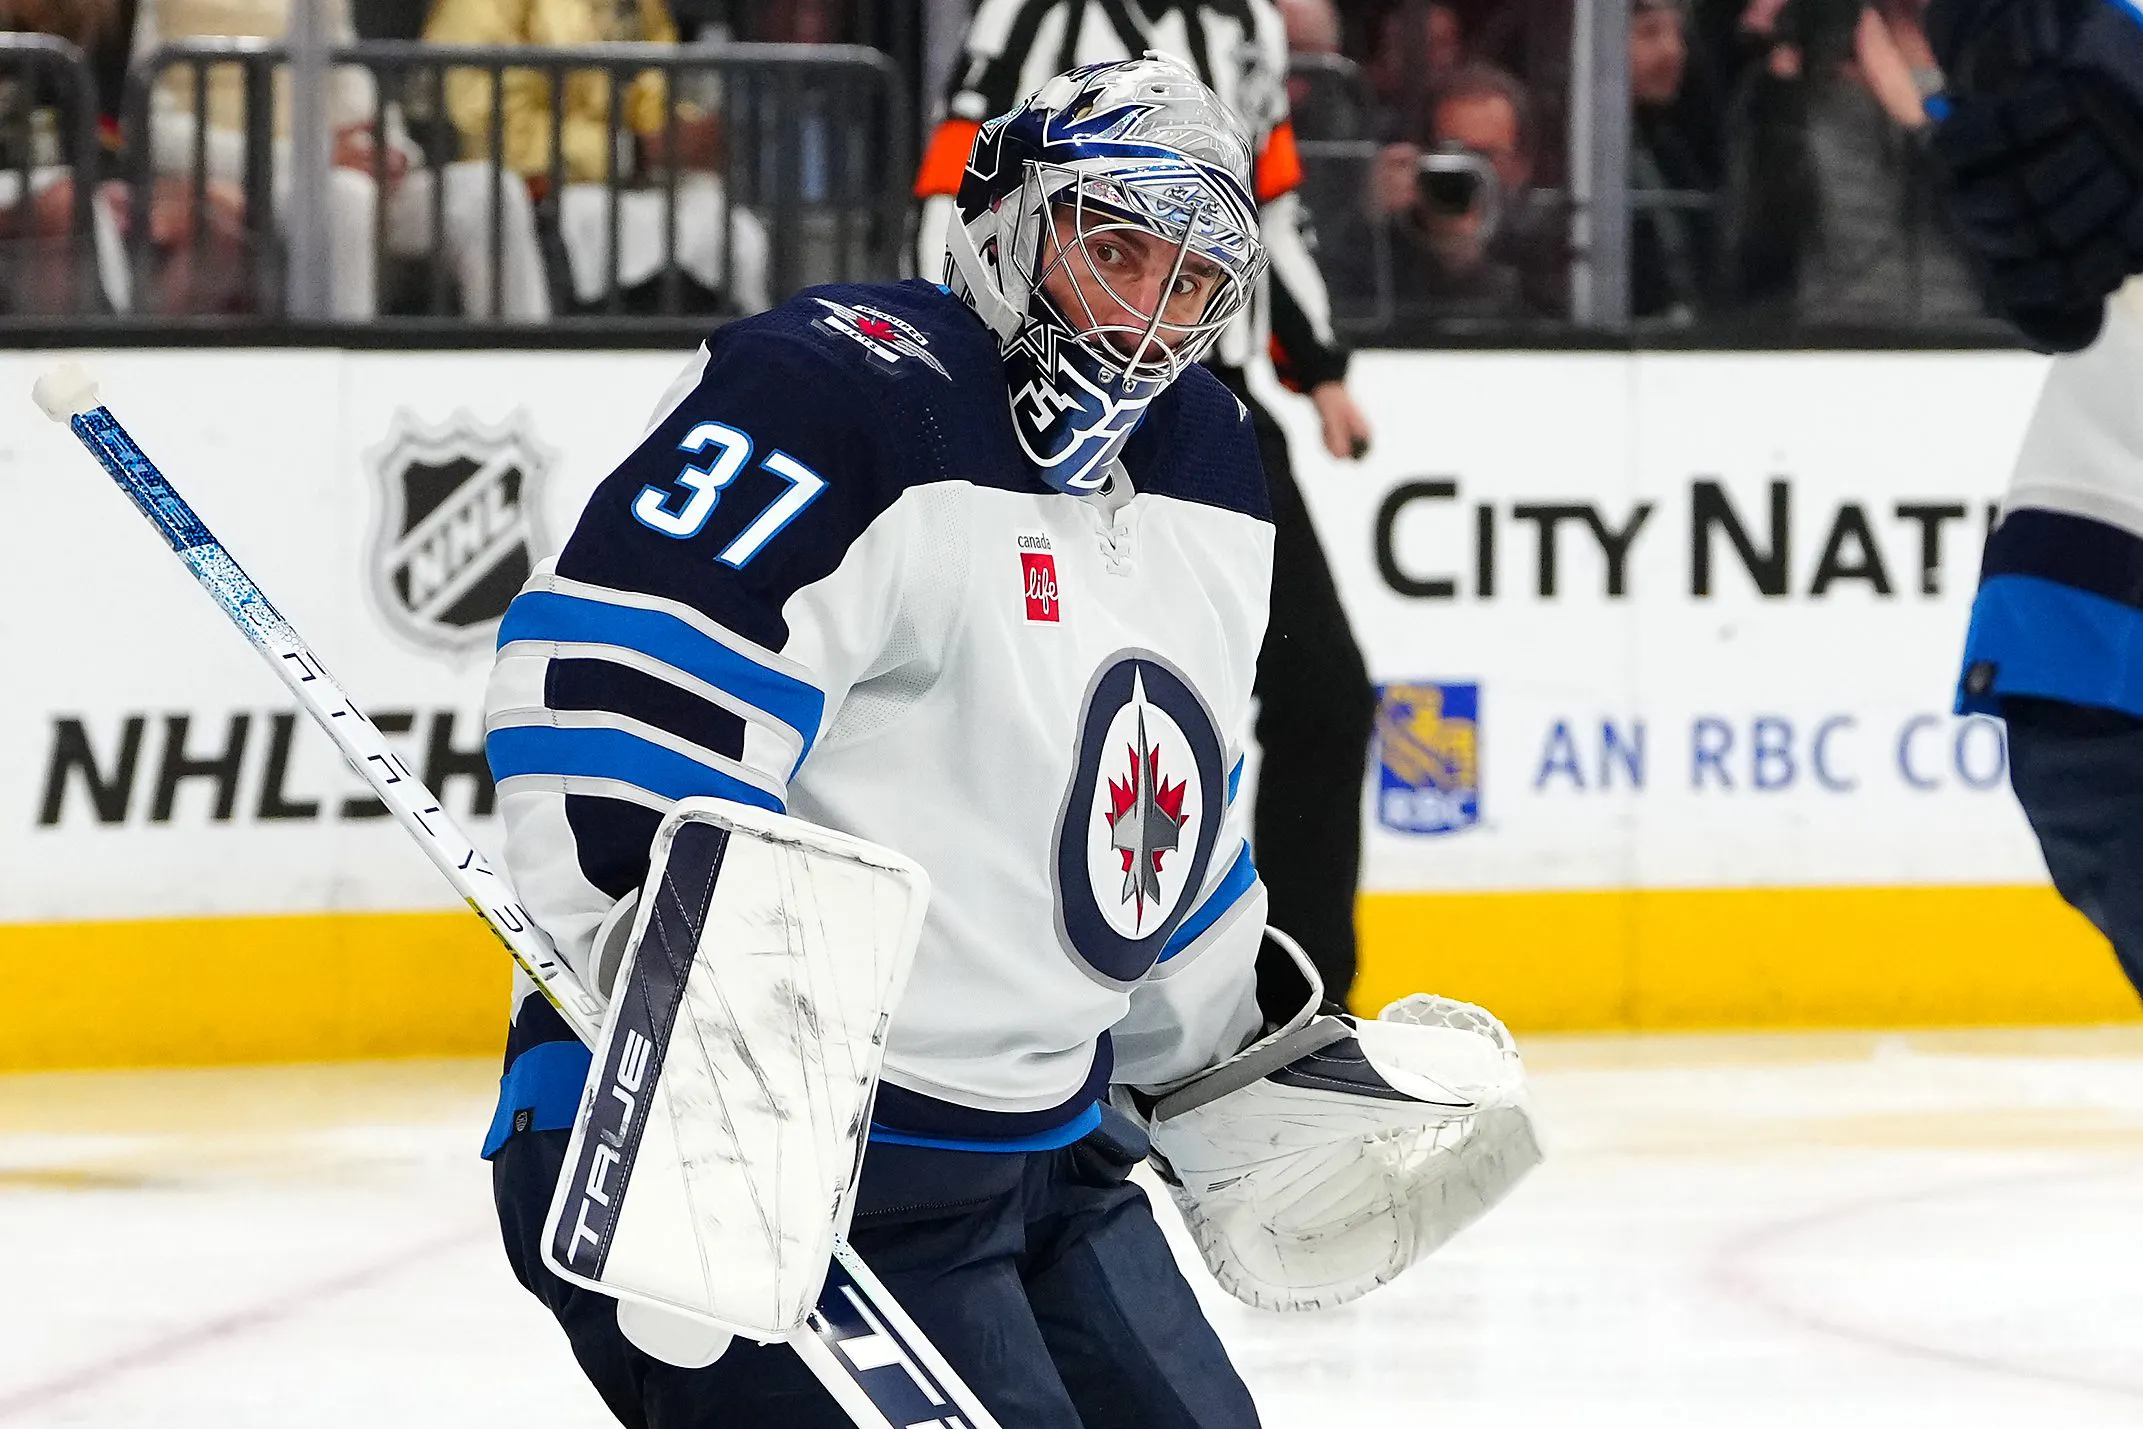 Jets goaltender Connor Hellebuyck says he’s ‘not interested in a rebuild’